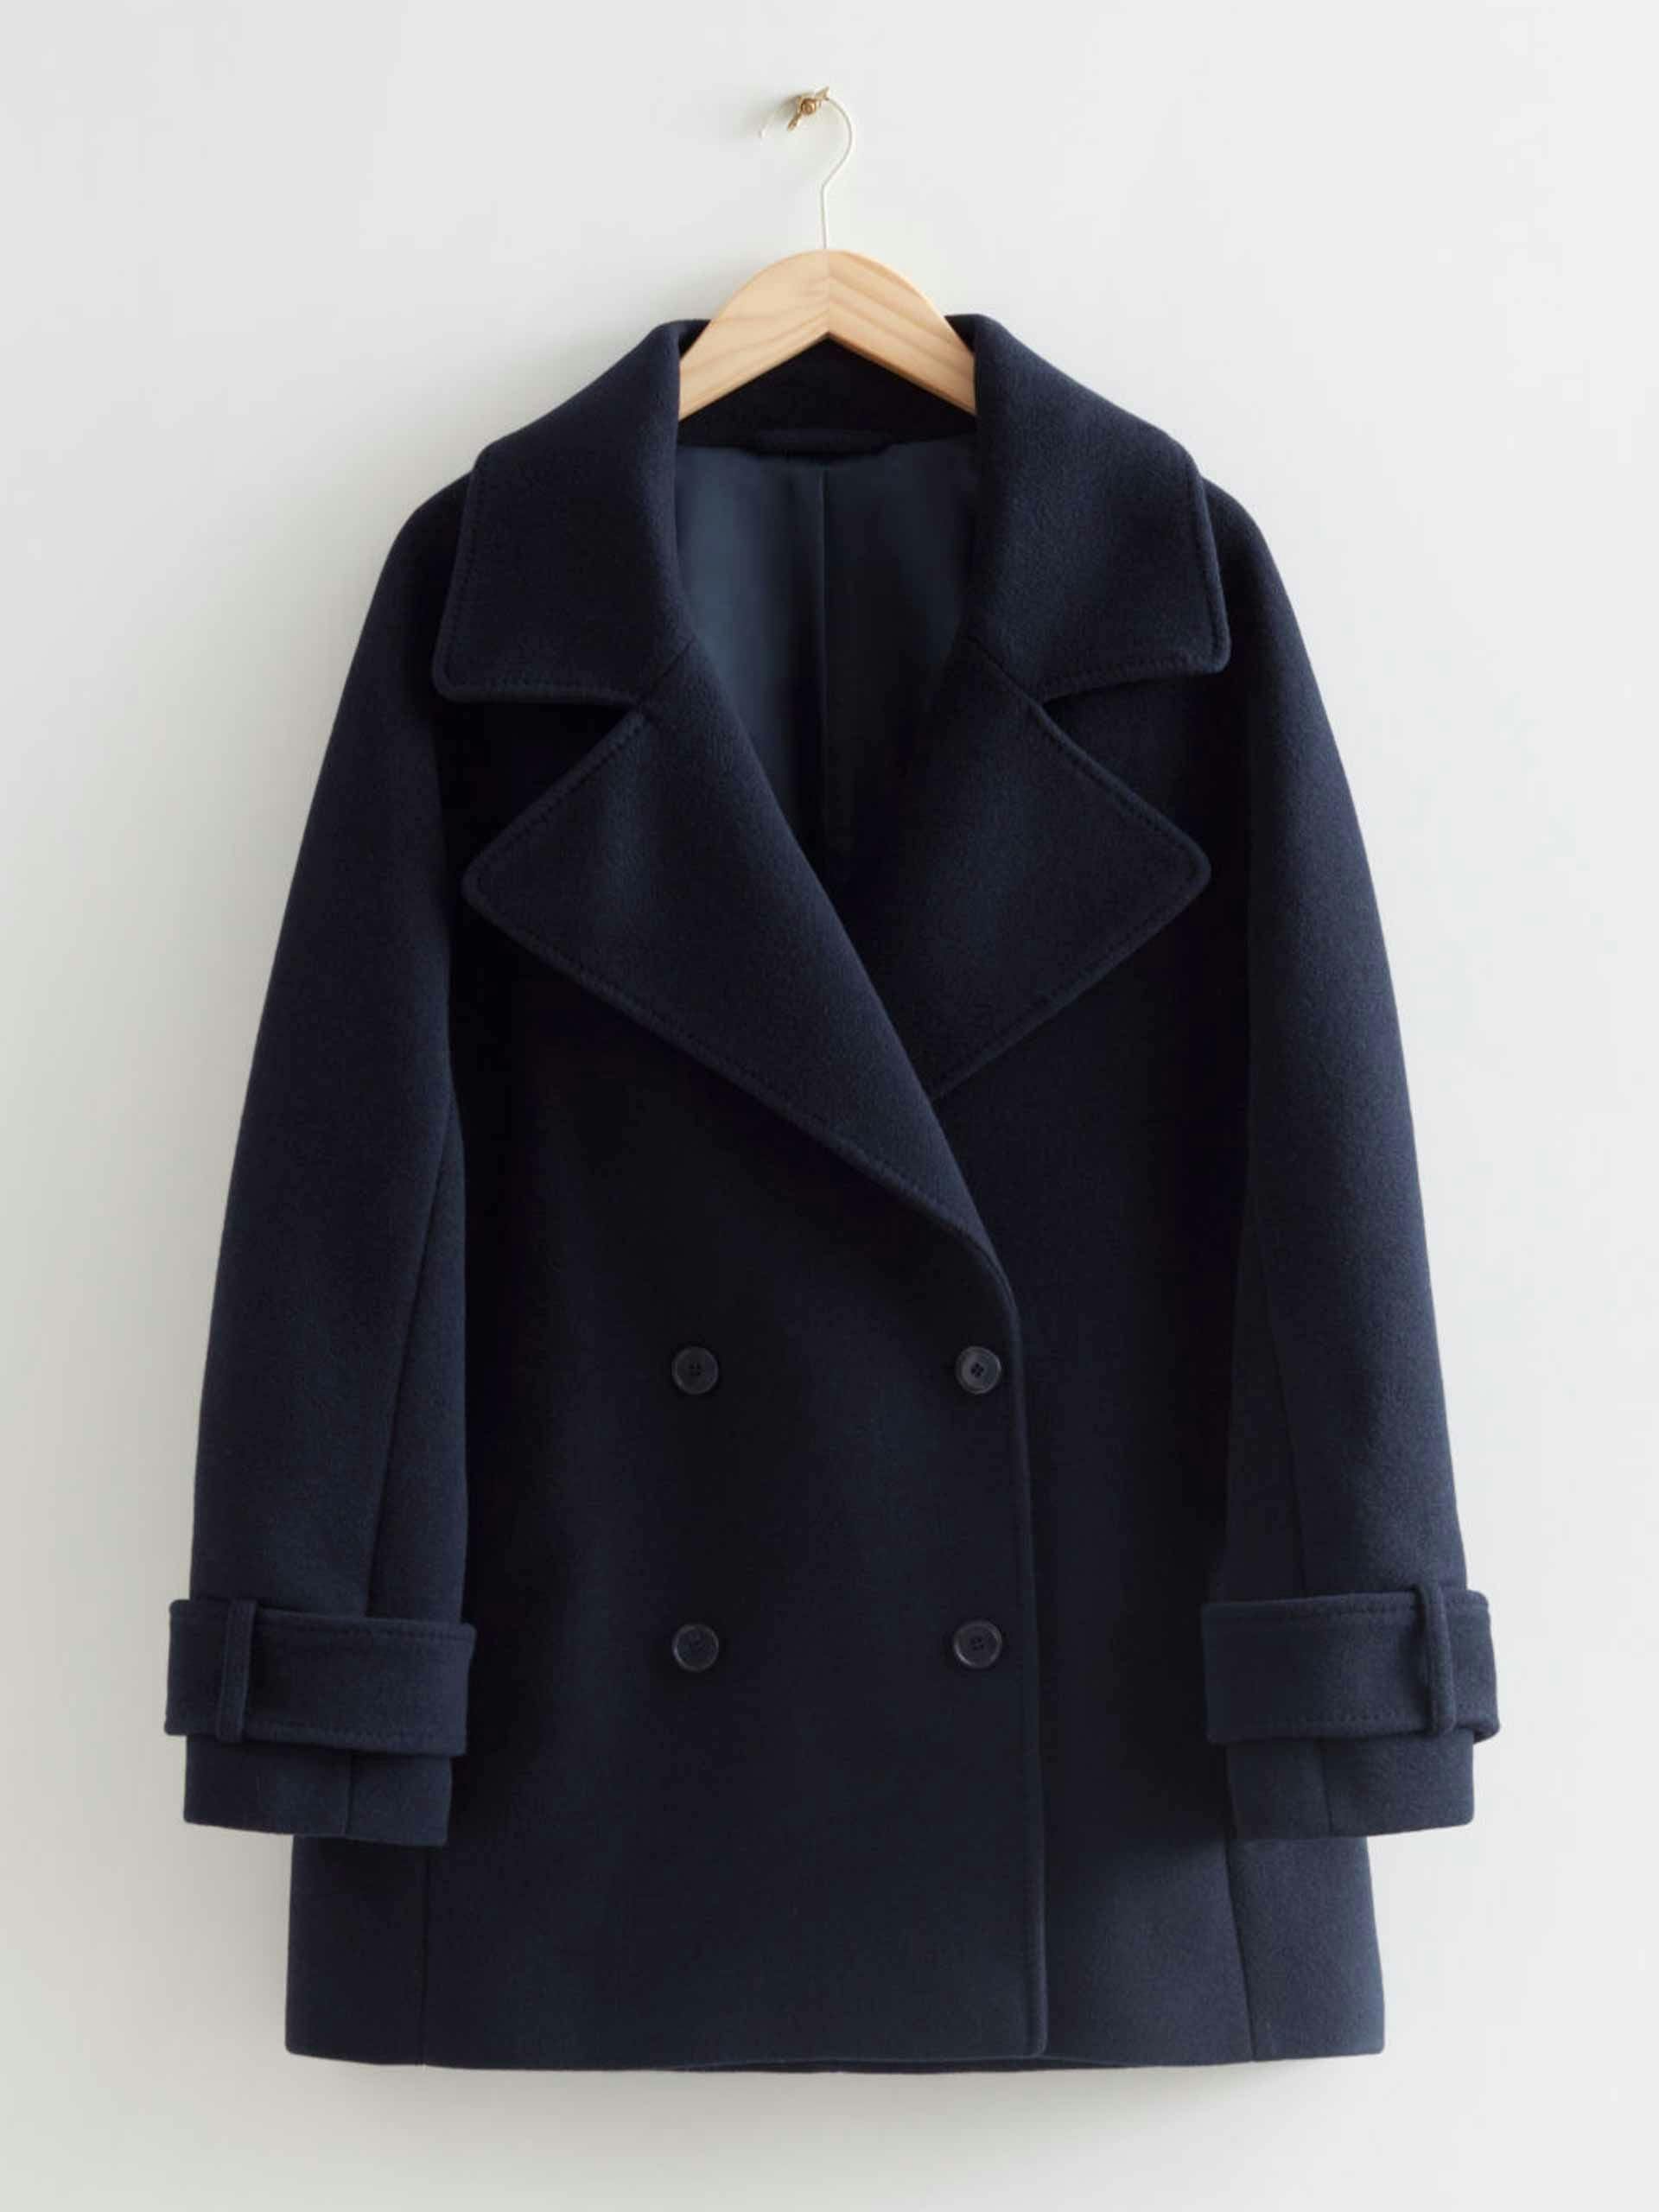 Relaxed Pea coat